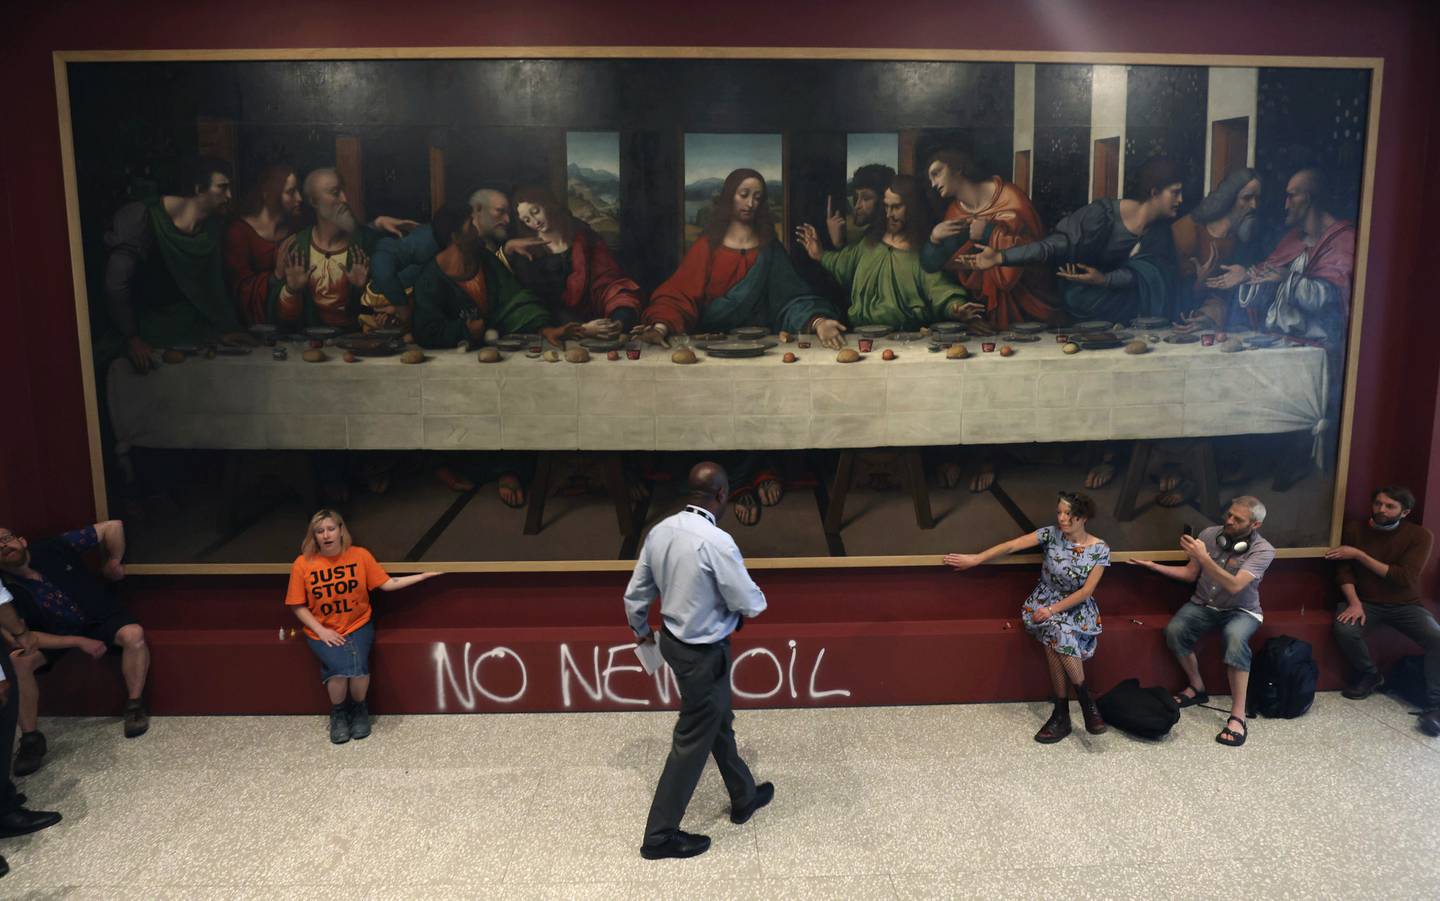 Just Stop Oil members glue their hands to the frame of a copy of Leonardo da Vinci's, 'The Last Supper', inside the Royal Academy, London. Photo: PA via AP